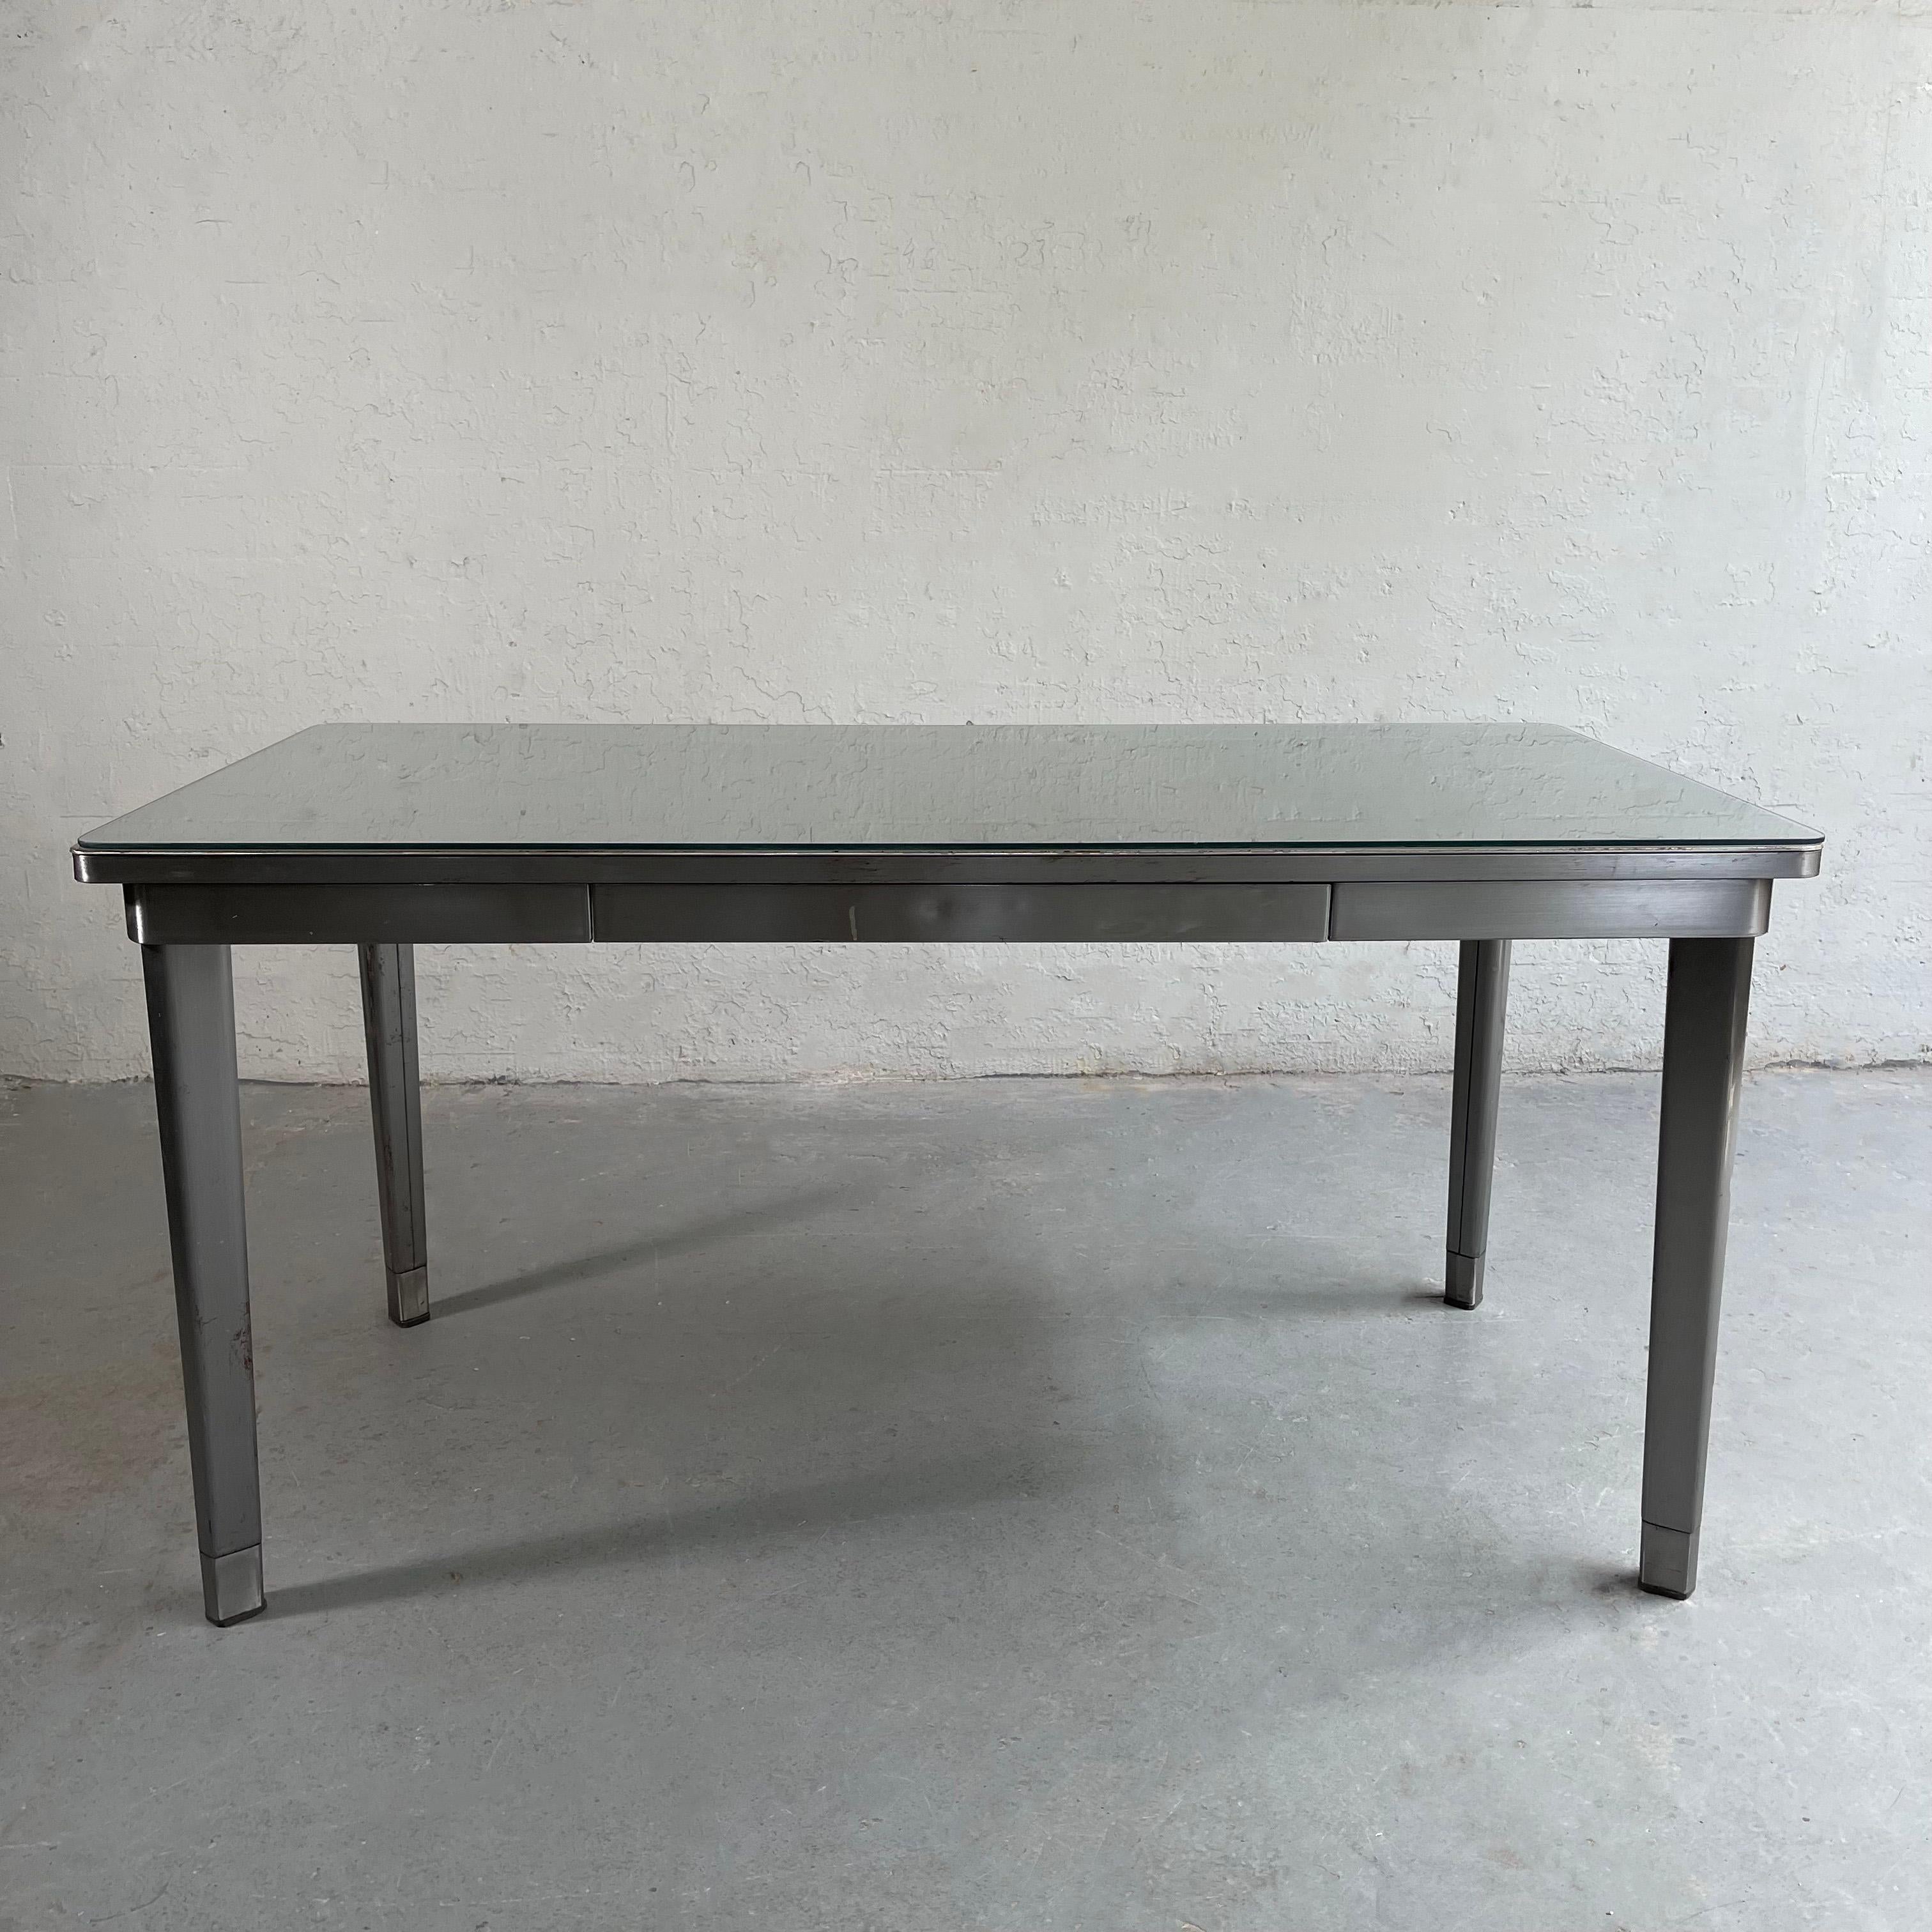 Midcentury, Industrial, brushed steel, police station desk features one center drawer and a removeable glass top. This minimal desk can do double duty as a great work station or Industrial dining table. The apron of the table is 27 inches height.